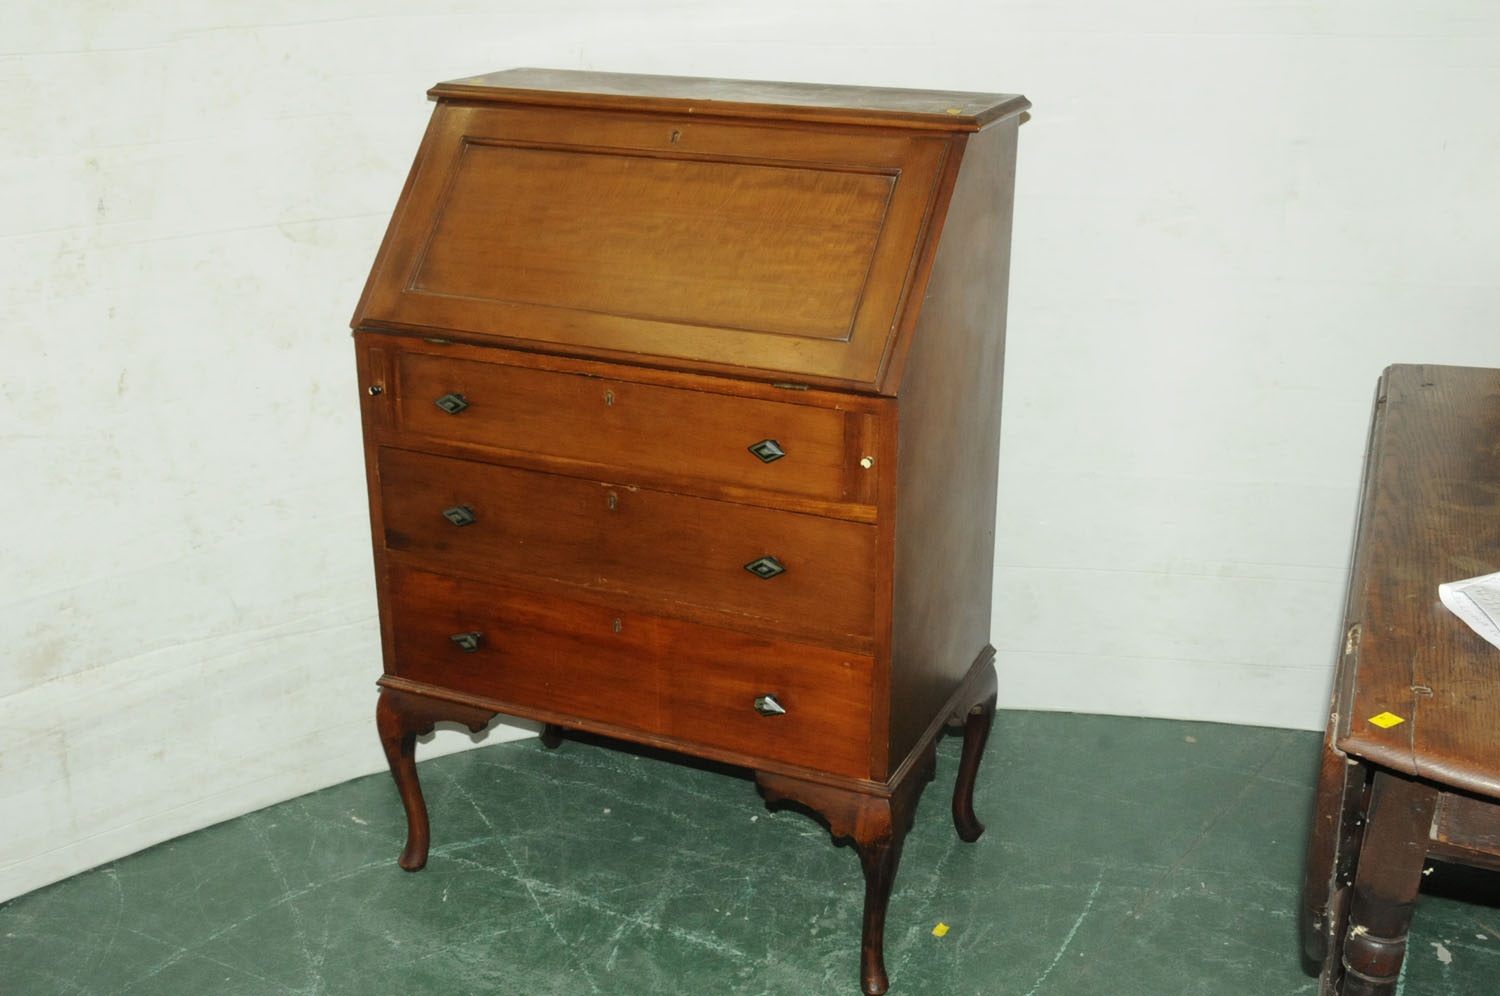 Mahogany bureau opening to a fitted interior with maroon tooled leather insert and drawers